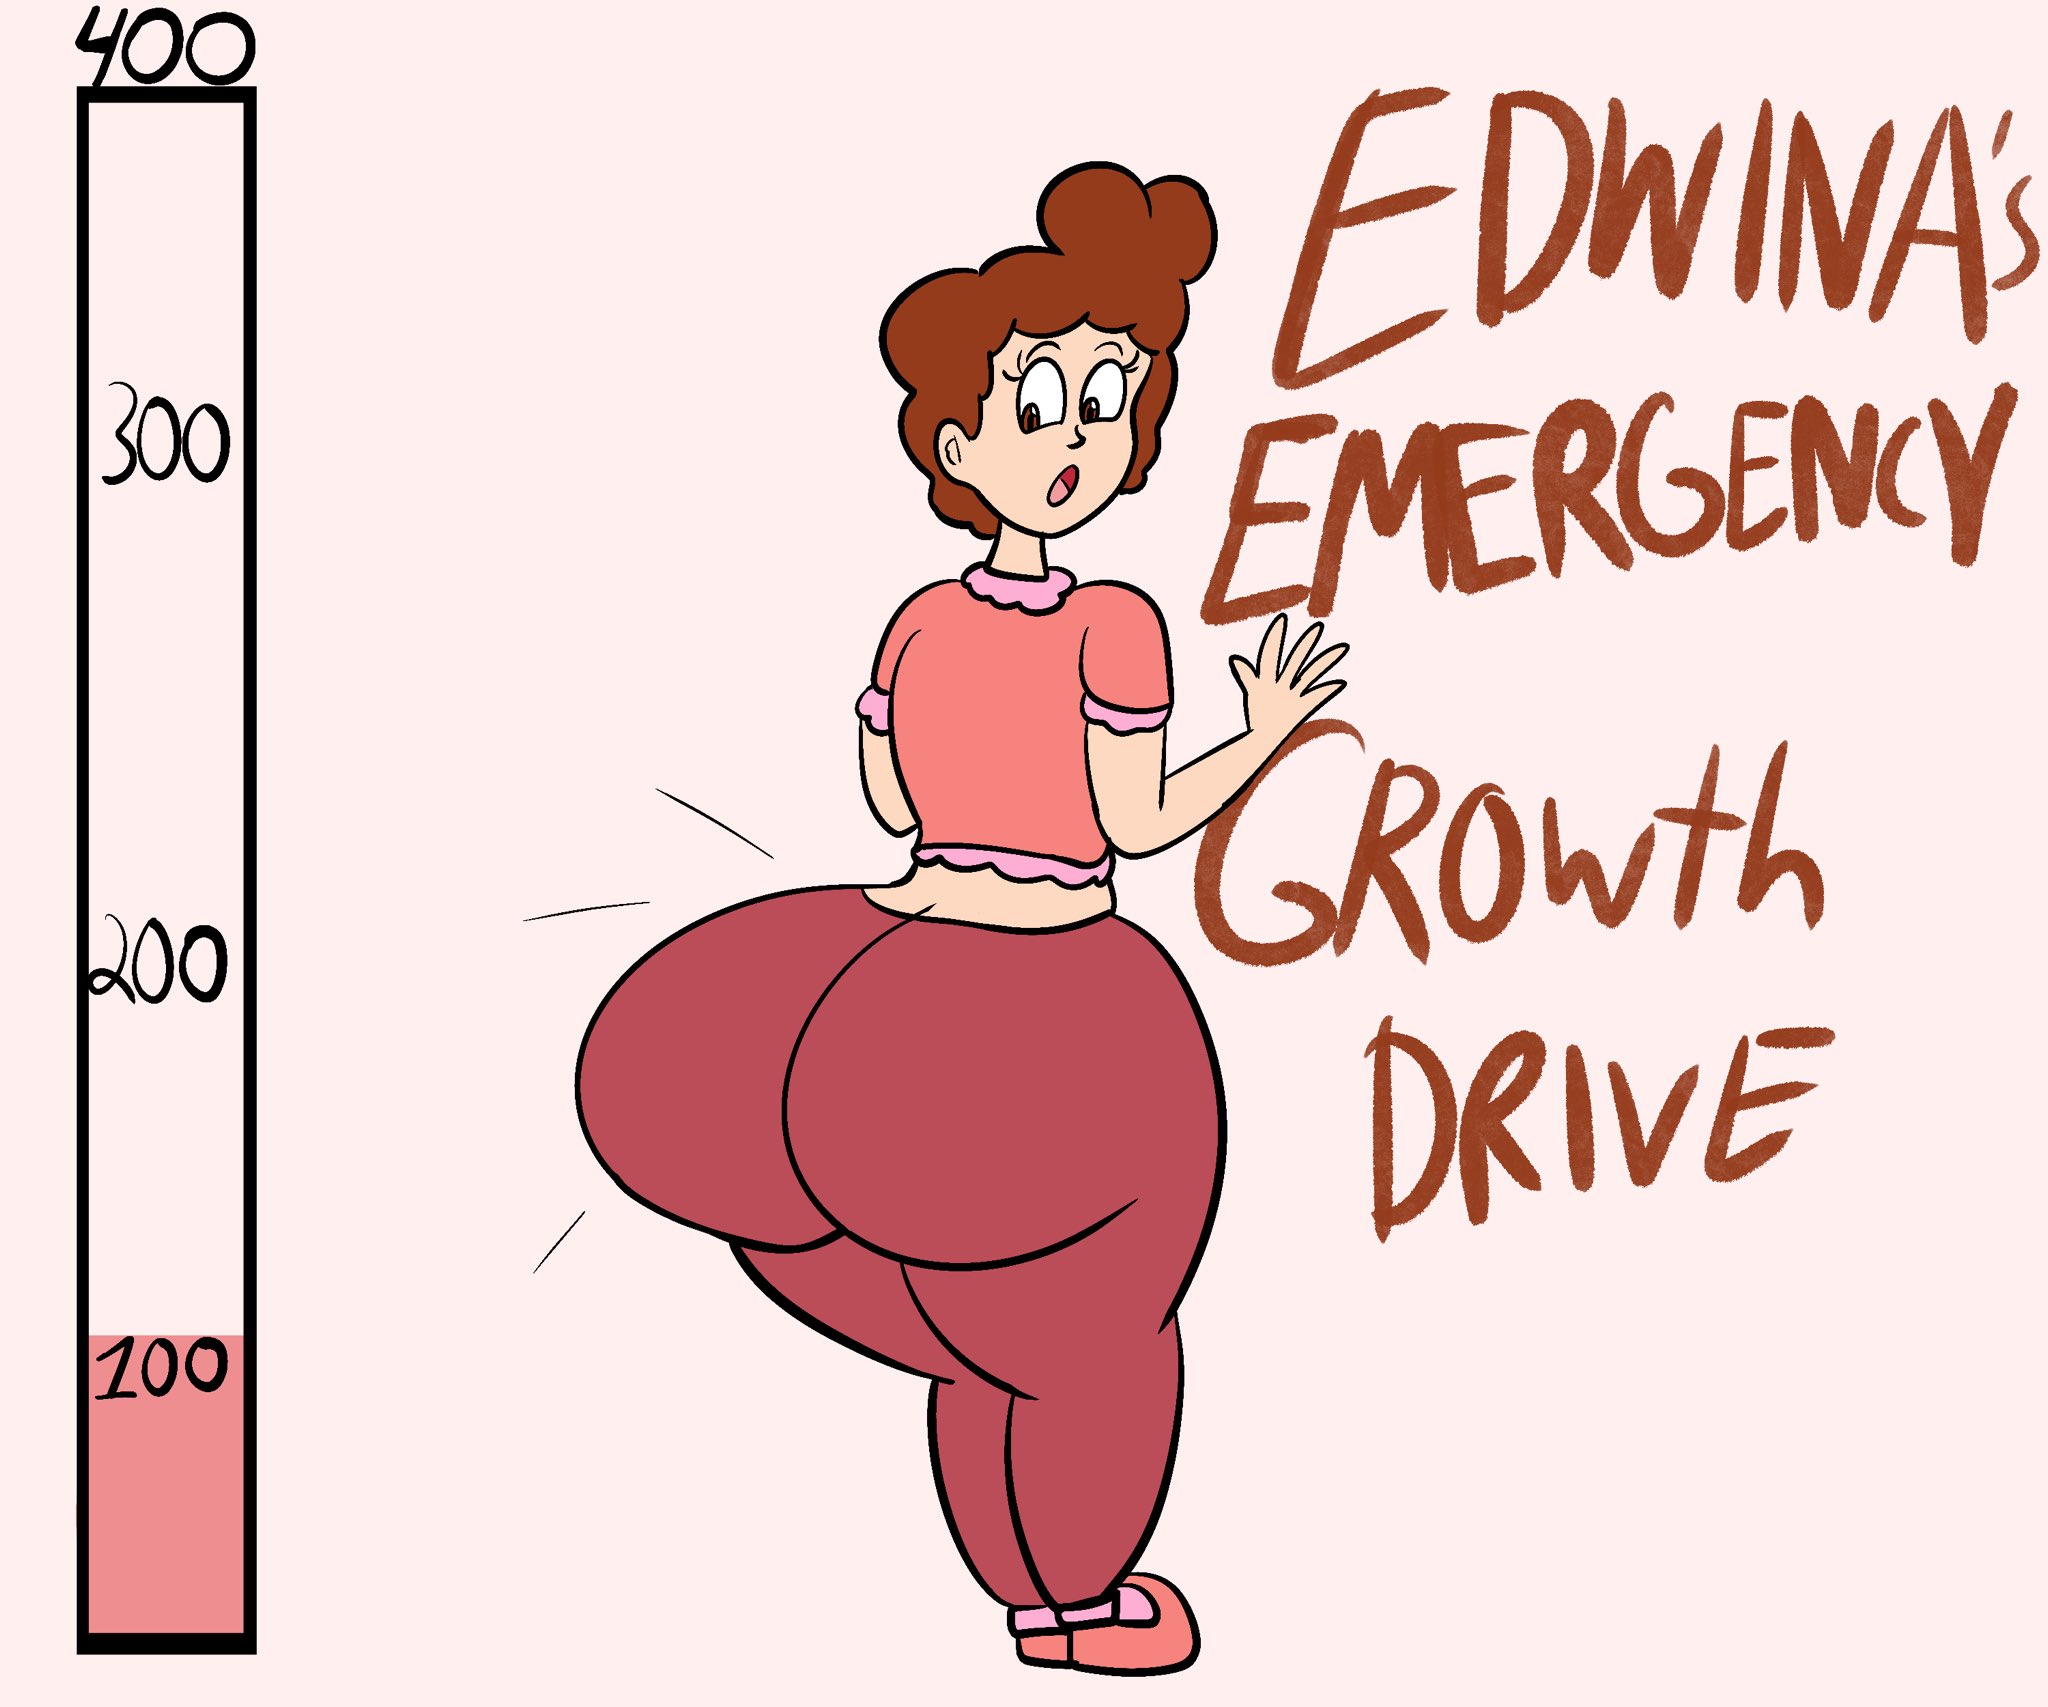 ButLova @ Megacon on X: Growth Drive UPDATE: $100 has been reached!  Edwina's dumpy grows and you still have a chance to grow her even bigger!  :D t.codMUEzenyVc  X